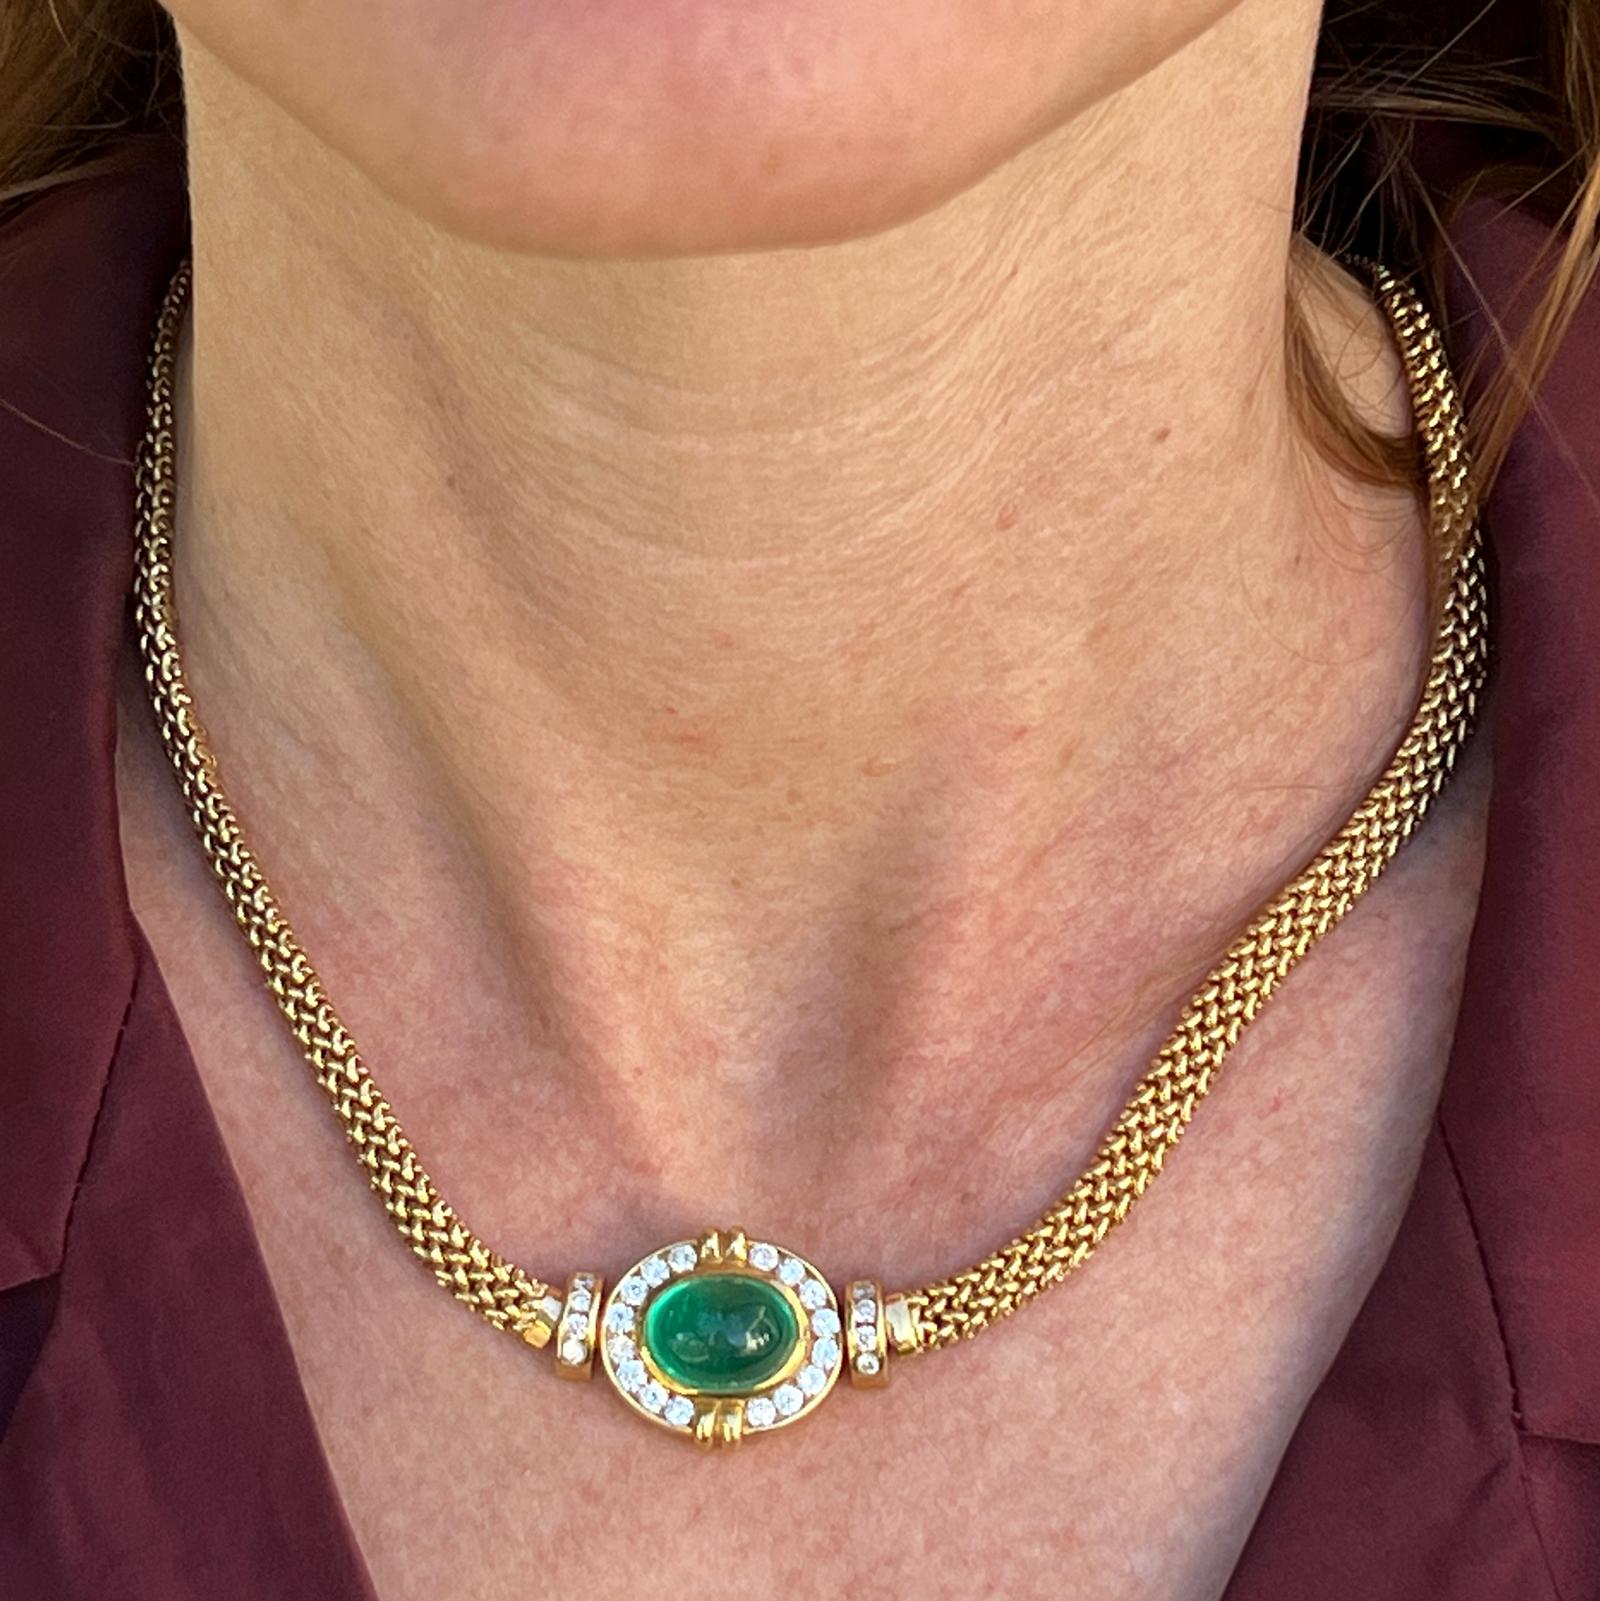 Beautiful emerald and diamond pendant necklace crafted in 18 karat yellow gold. The  15 x 20mm pendant features an approximately 8.00 carat cabochon oval emerald gemstone surrounded by 24 round brilliant cut diamonds weighing approximately 1.32